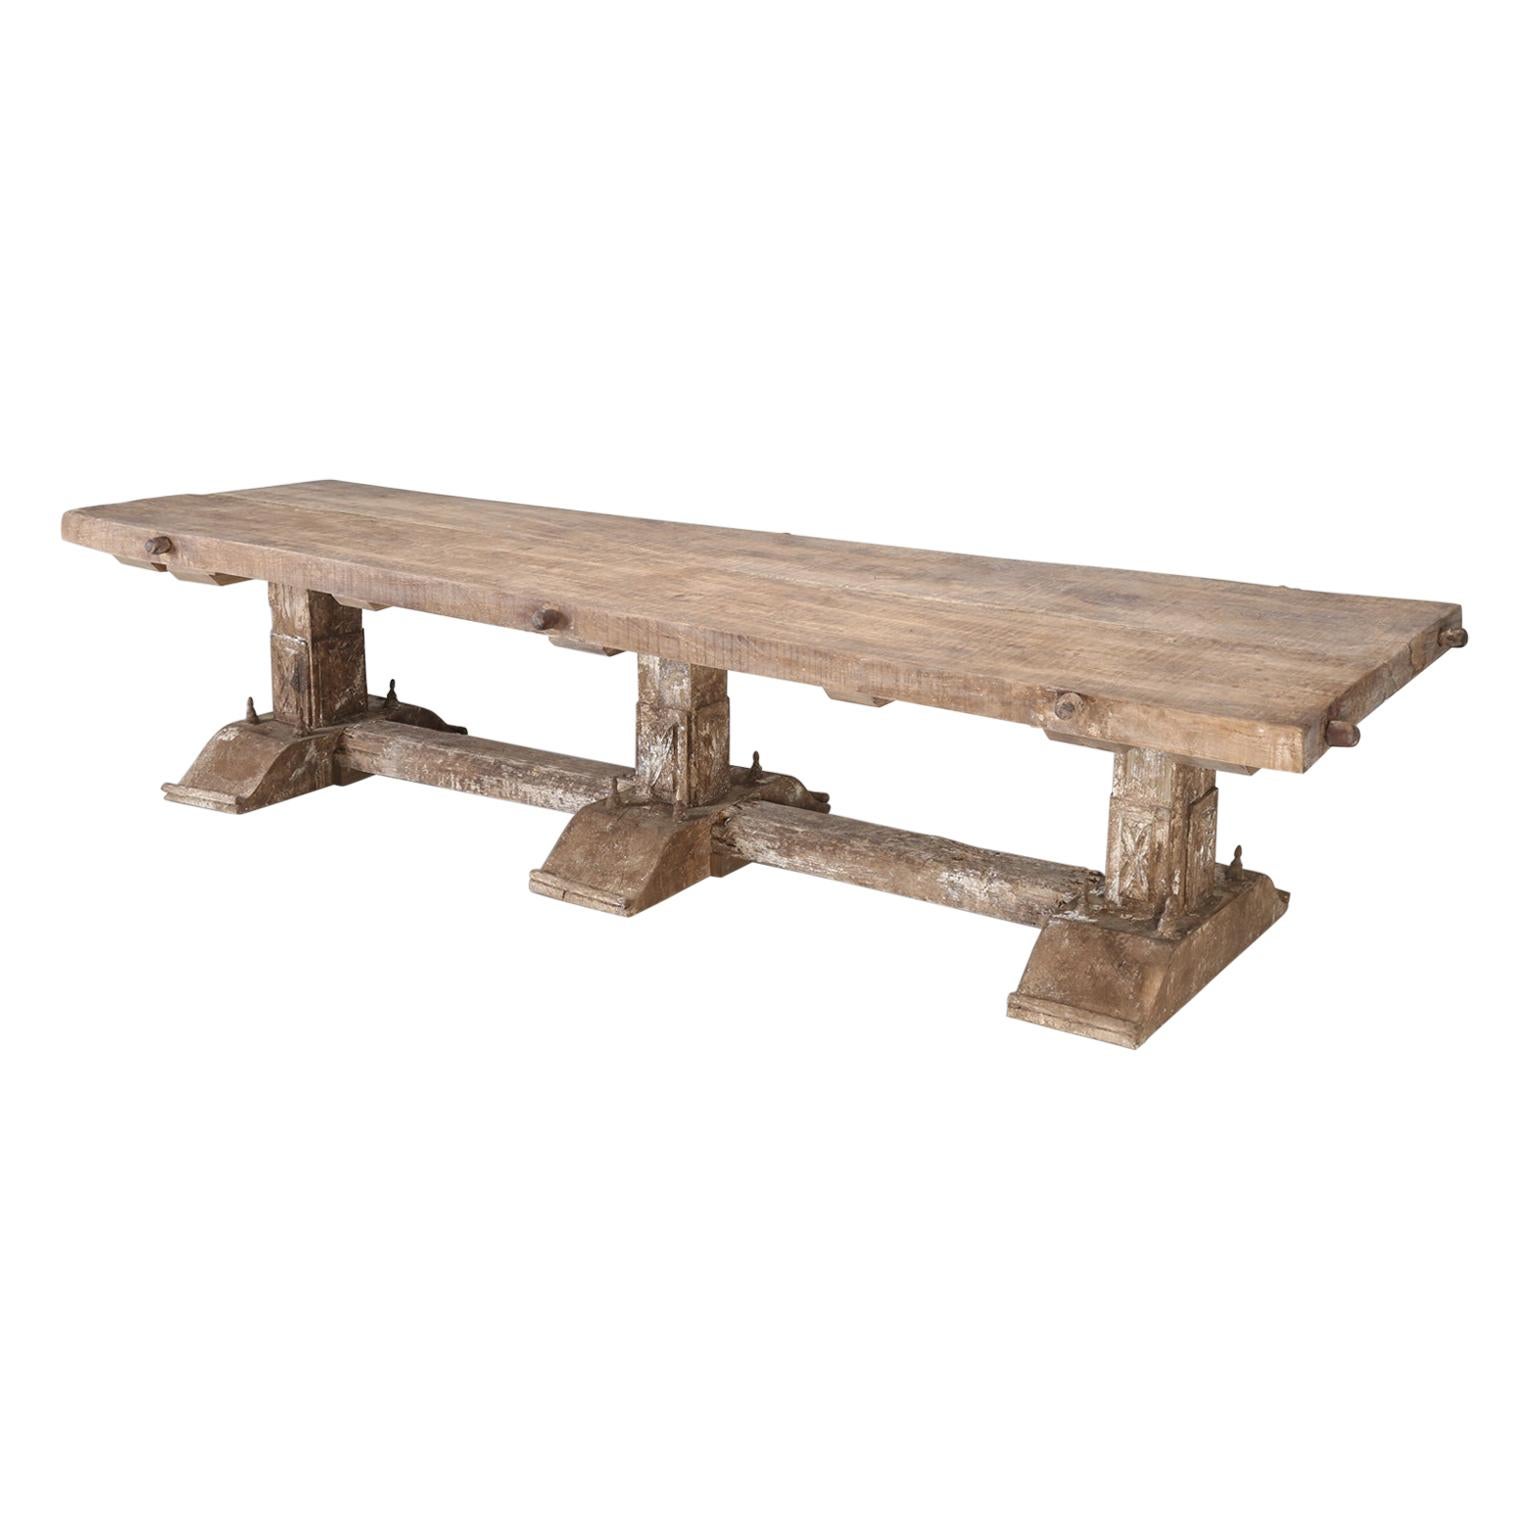 Country Italian Massive Size Dining Table Still in its Original Rustic Finish